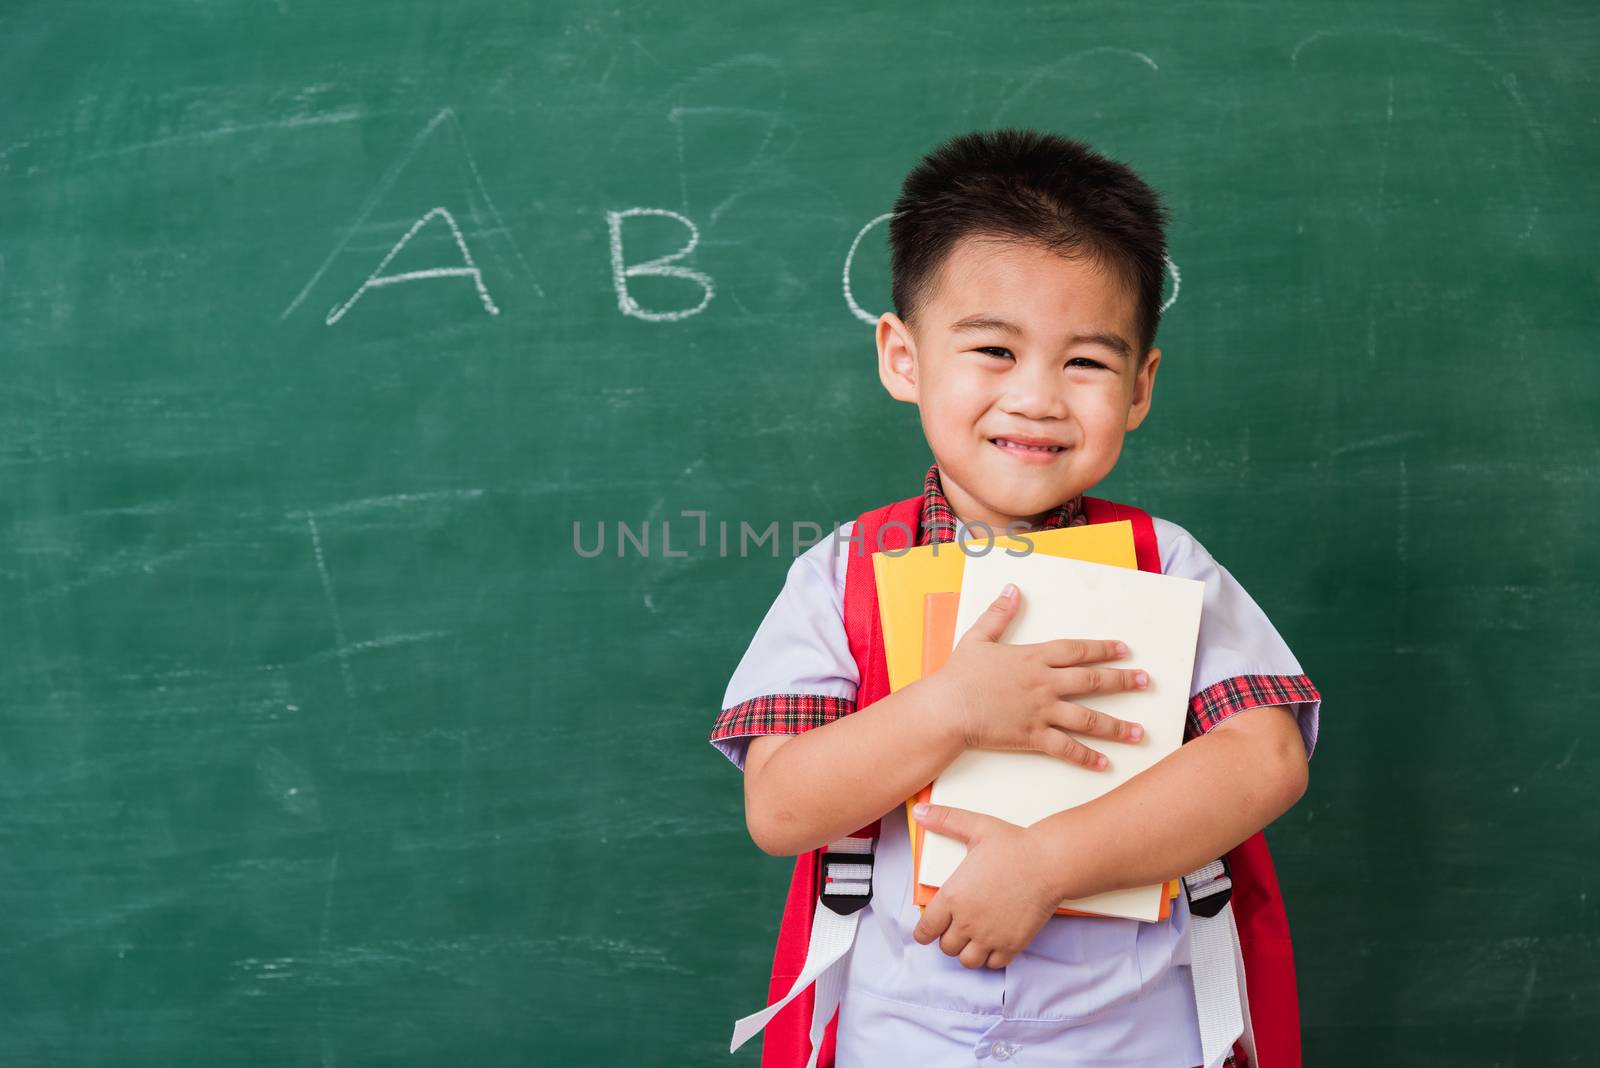 Back to School. Happy Asian funny cute little child boy from kindergarten in student uniform with school bag hold or hug books smile on green school blackboard, First time to school education concept